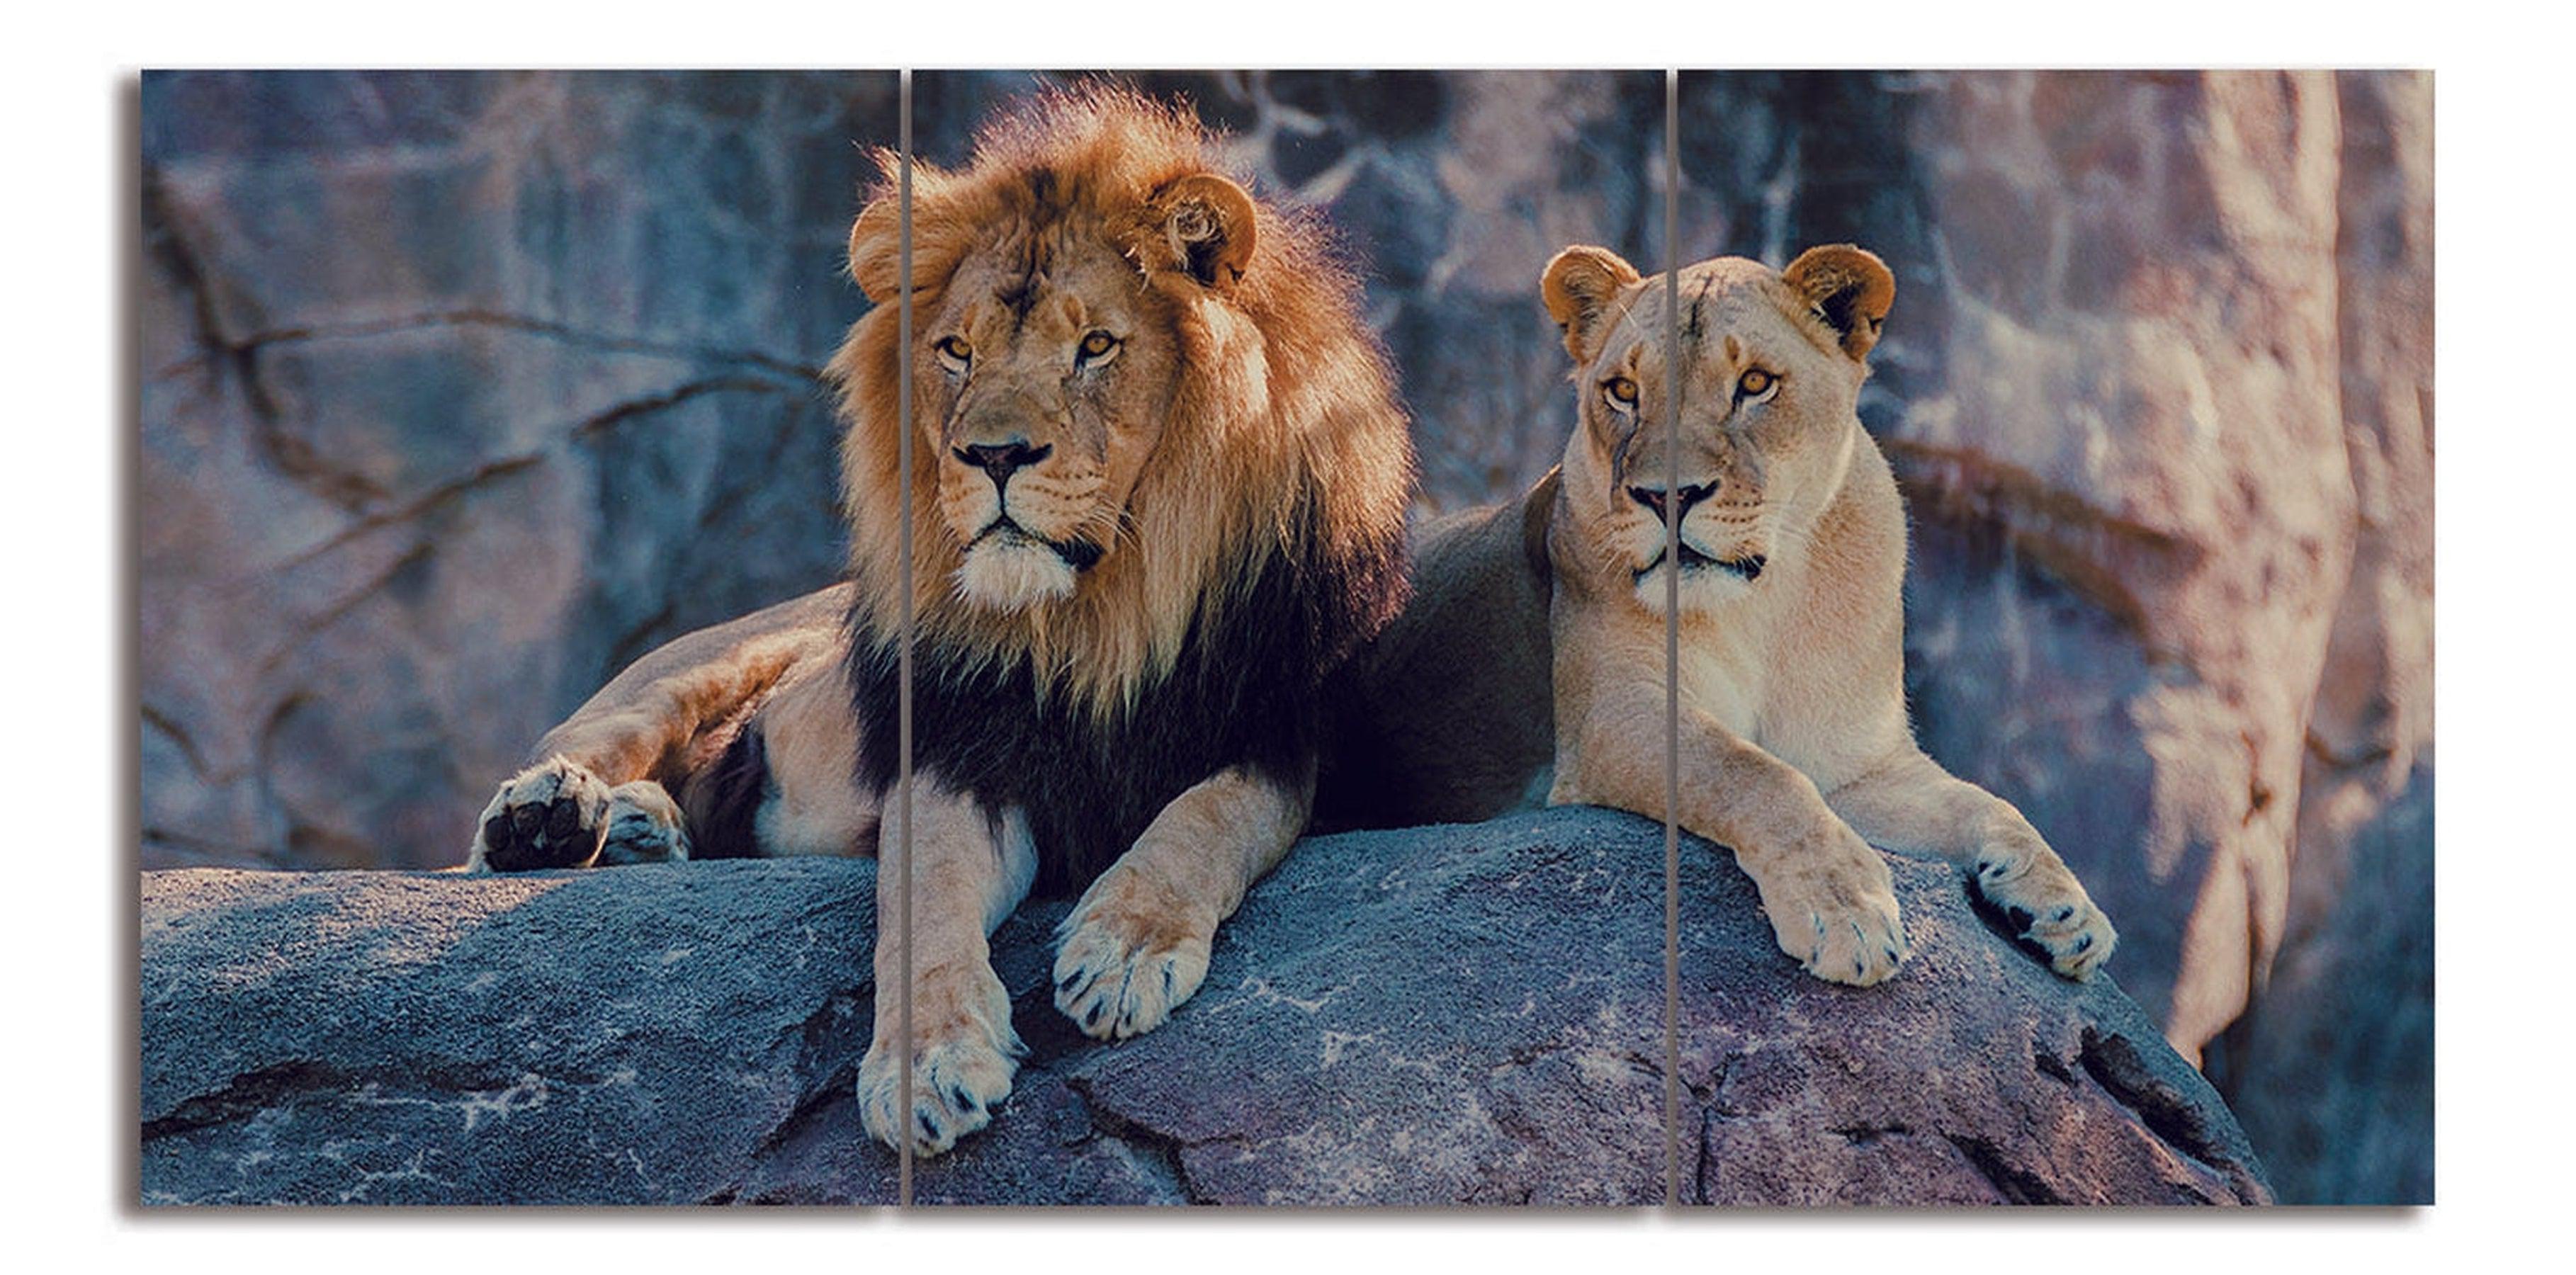 Lion King And Queen Of The Jungle Wall Art | 50x70 cm